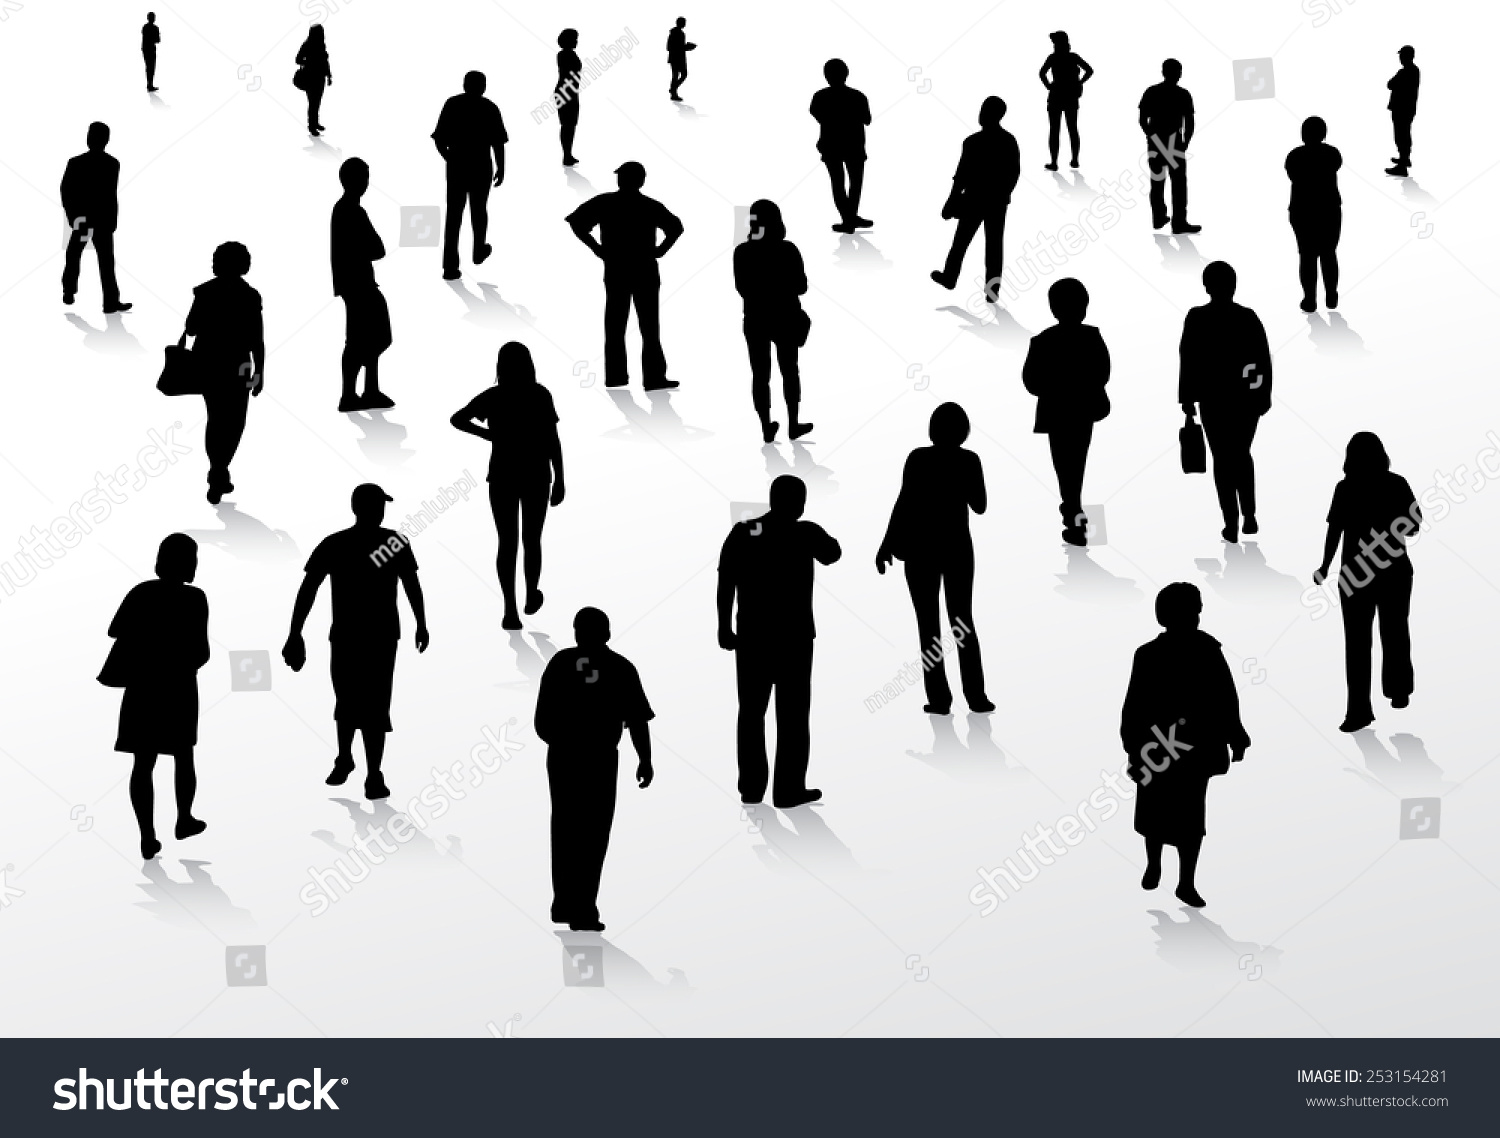 People Silhouettes Walking Outdoors Stock Vector 253154281 - Shutterstock